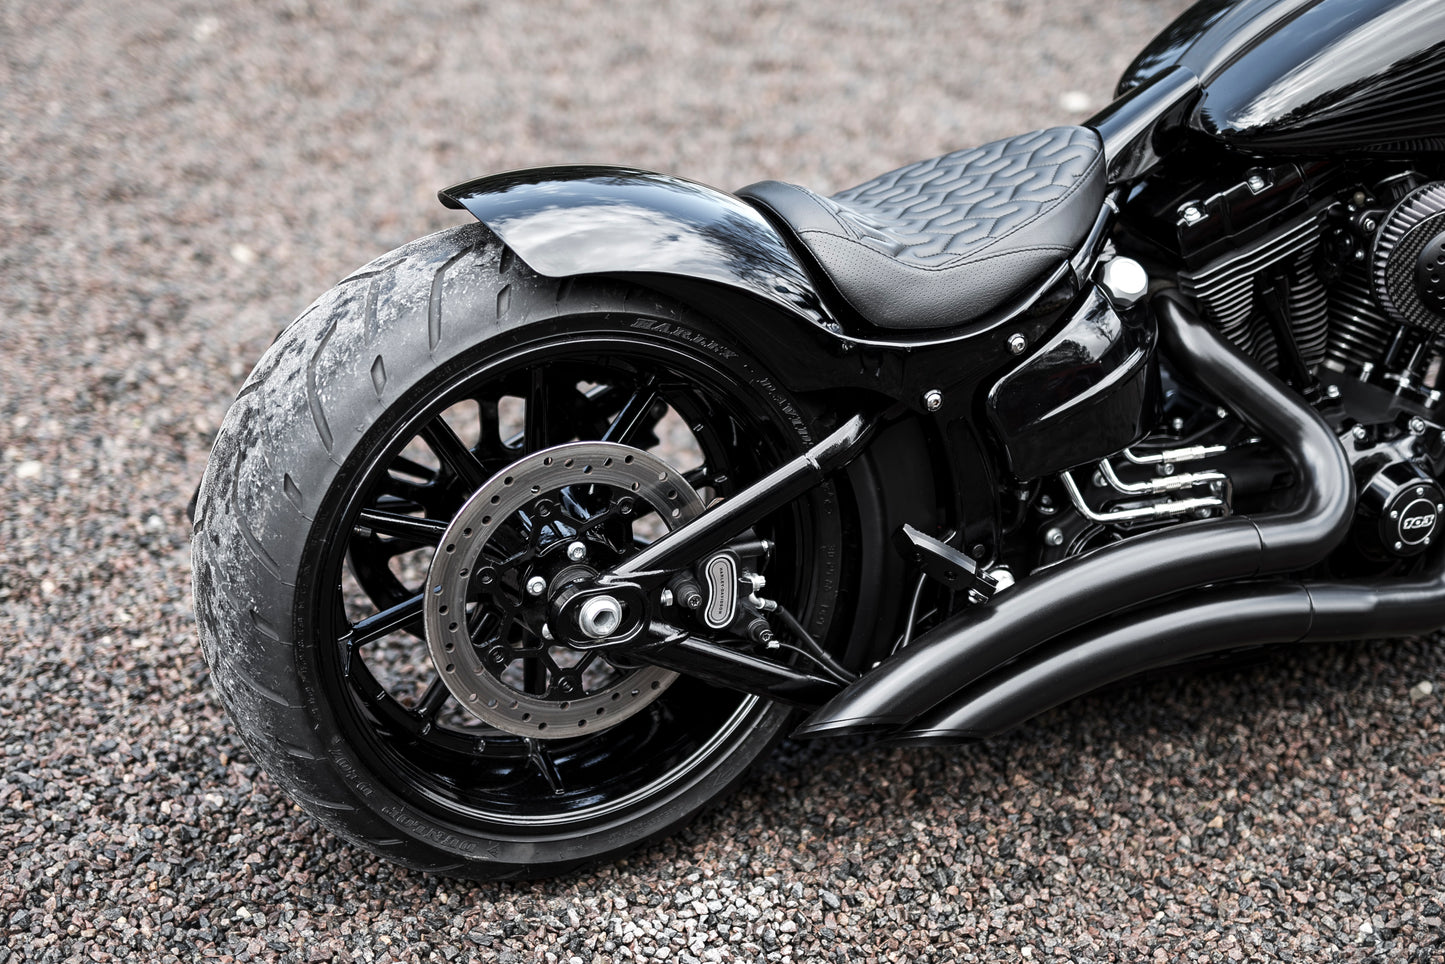 Harley Davidson motorcycle with Killer Custom  "Competition Series" front wrap fender from the side blurry background